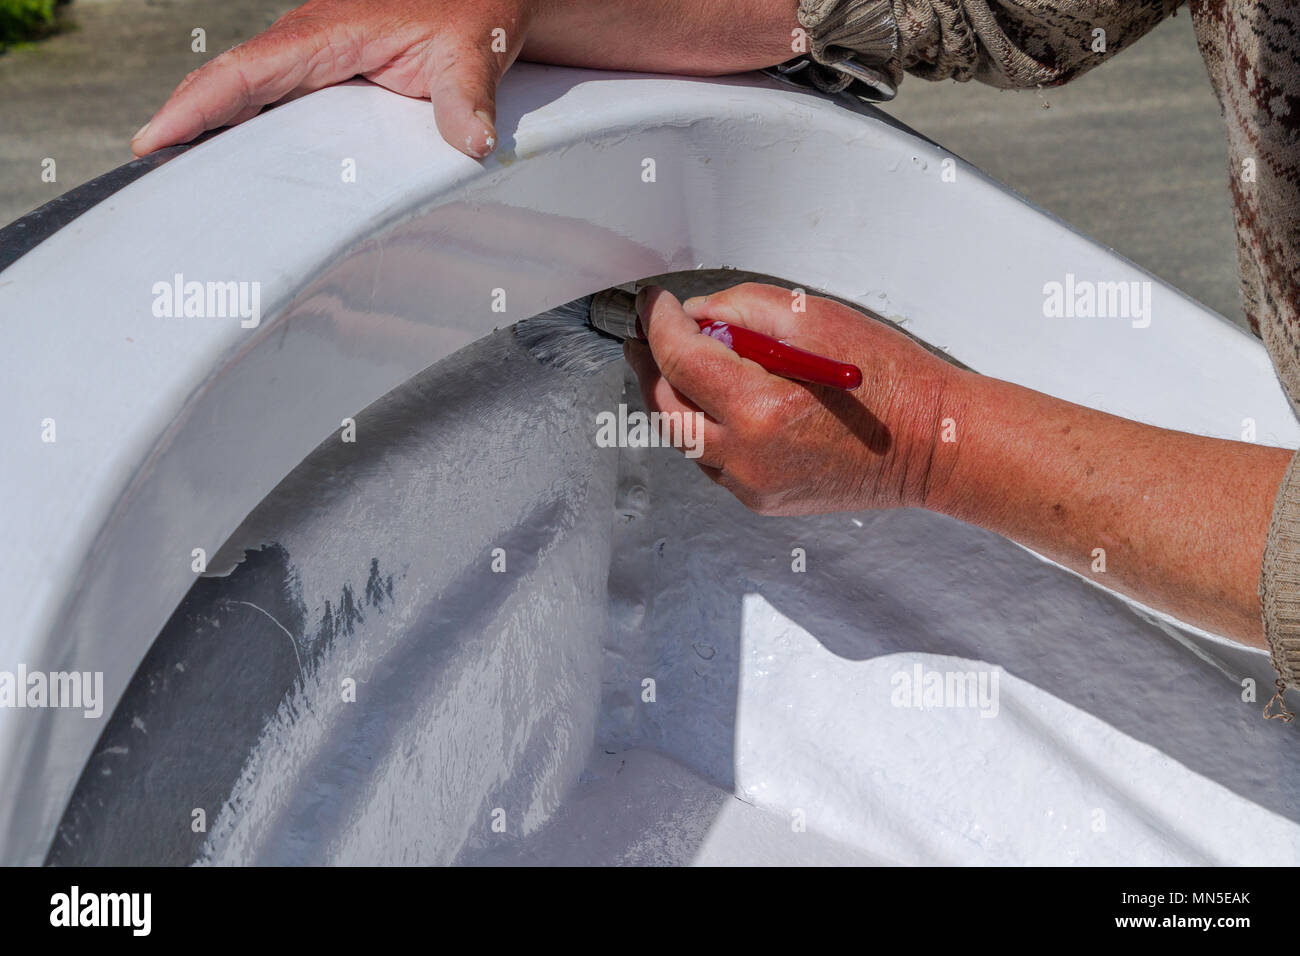 close up of painting the top coat of white paint onto the fibreglass hull of a fibreglass boat, using marine gloss paint. Stock Photo